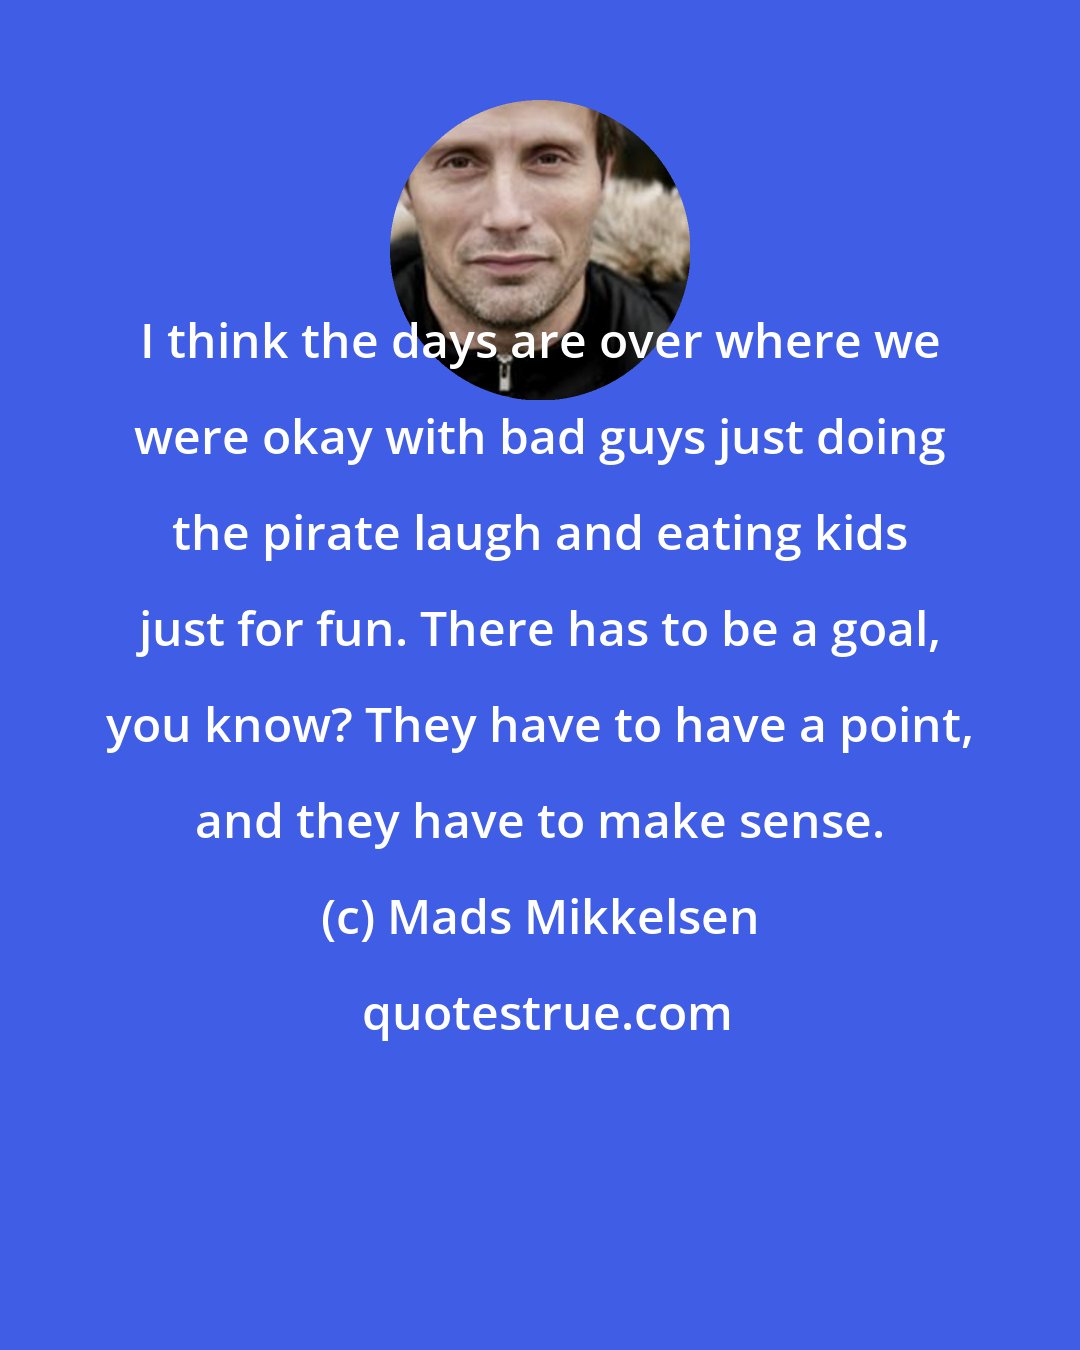 Mads Mikkelsen: I think the days are over where we were okay with bad guys just doing the pirate laugh and eating kids just for fun. There has to be a goal, you know? They have to have a point, and they have to make sense.